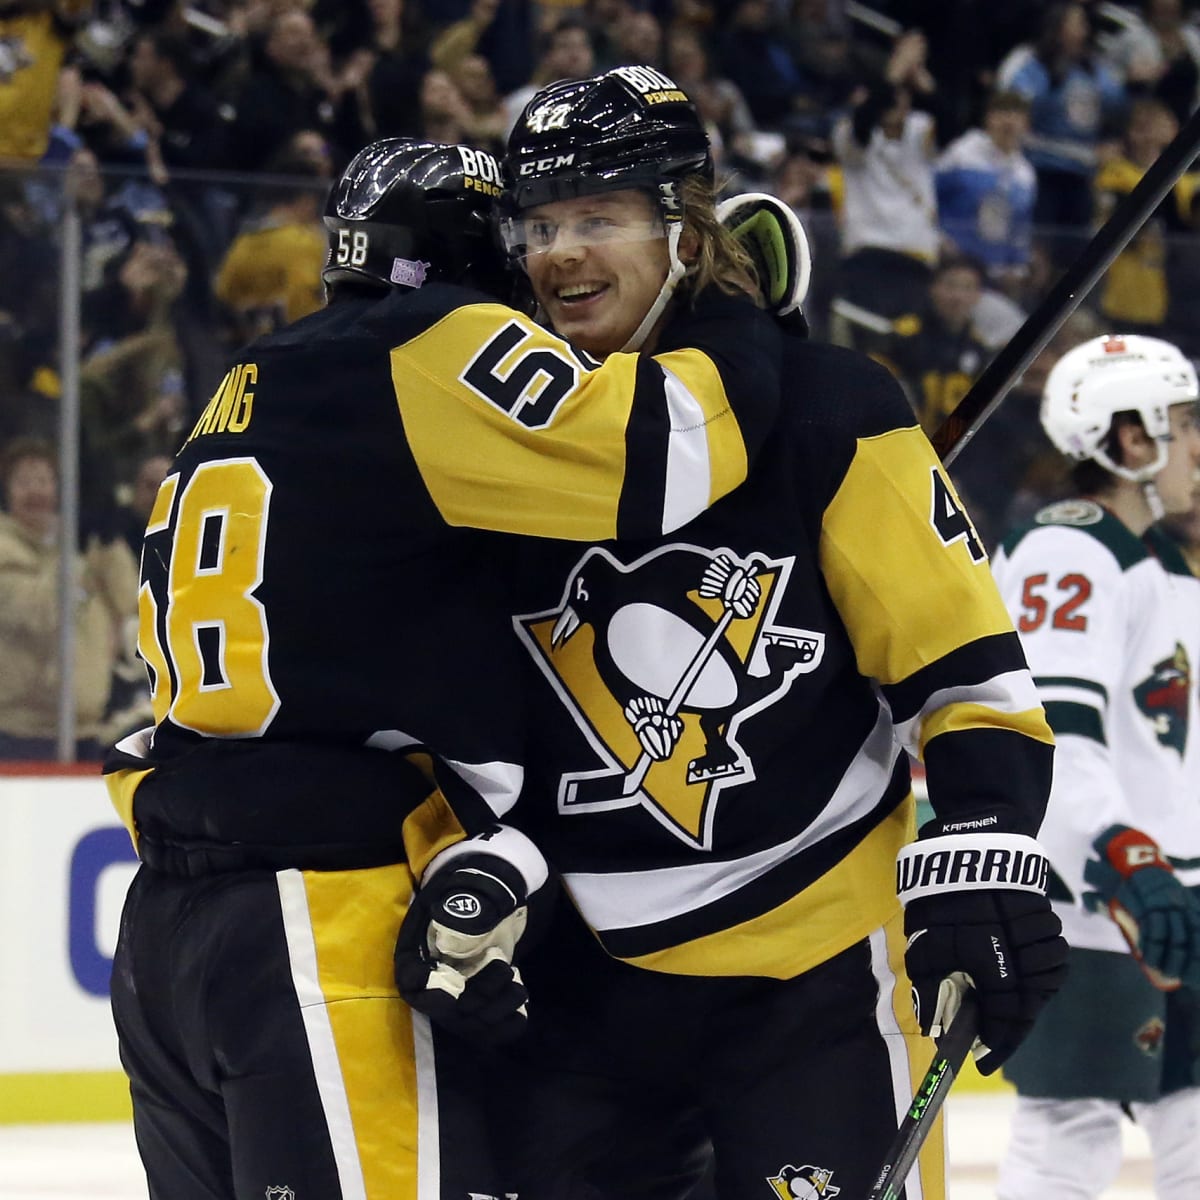 How to Watch the Pittsburgh Penguins Online, 2021-22 Schedule, TV Channel - How to Watch and Stream Major League and College Sports